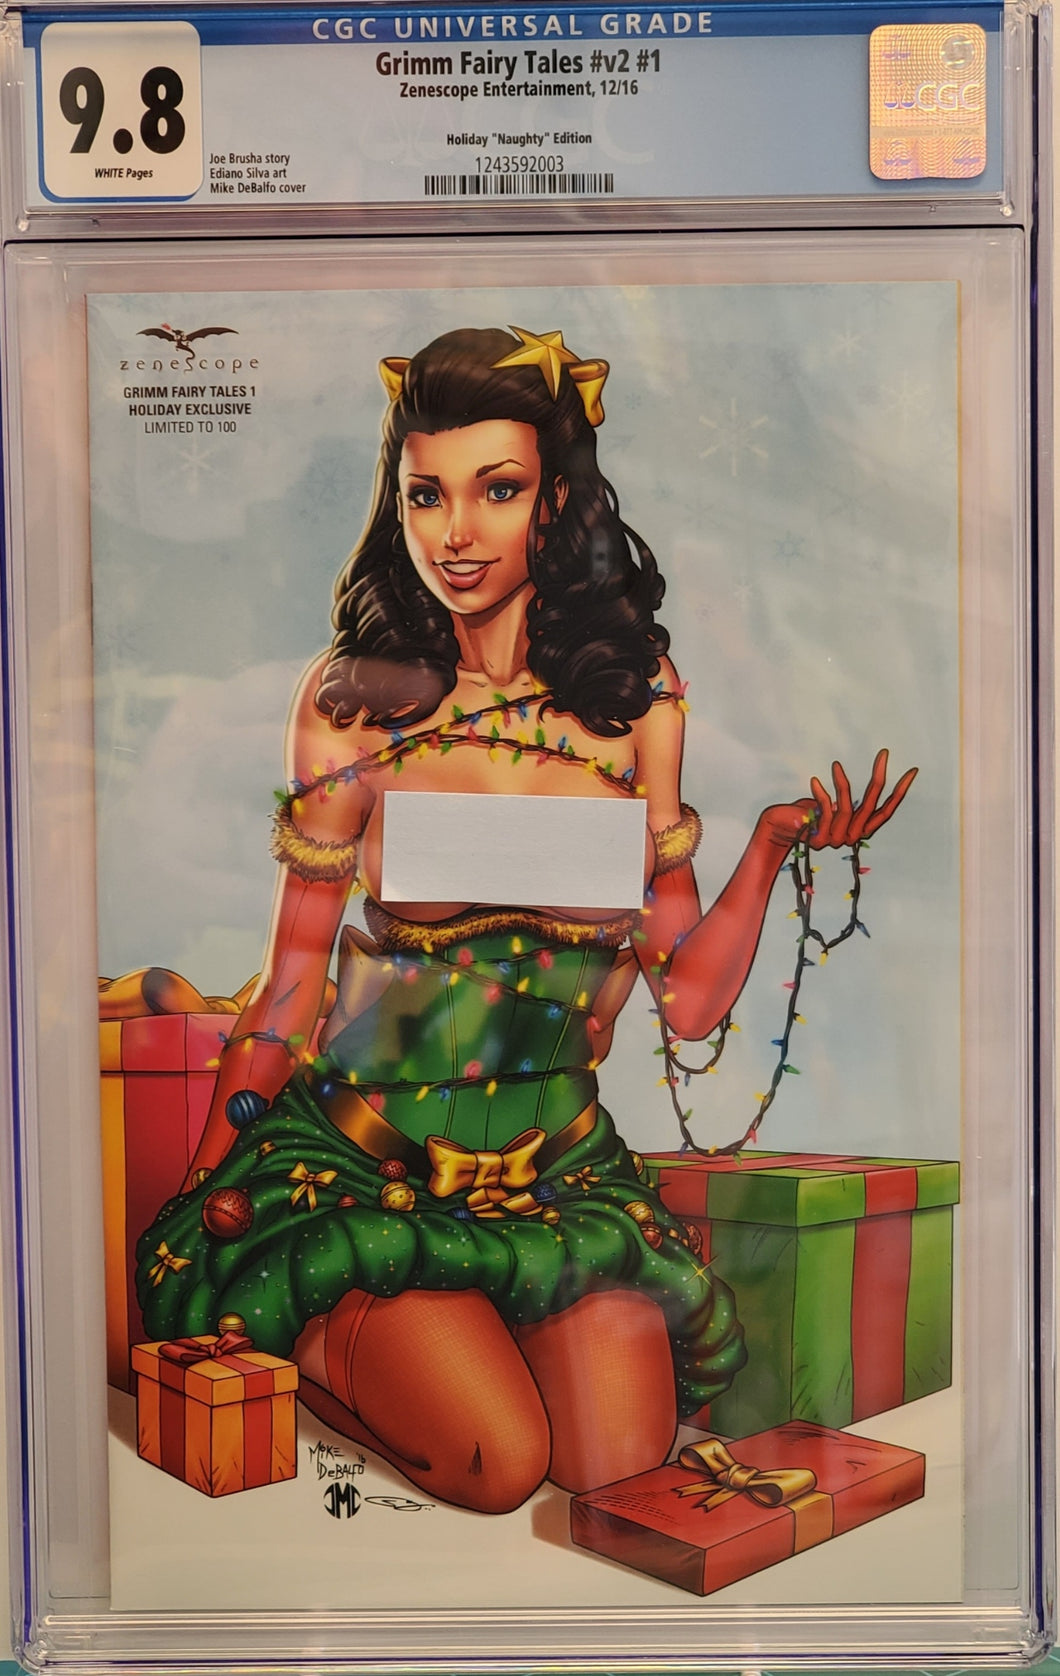 CGC 9.8 - Grimm Fairy Tales Vol 2 #1 Holiday 